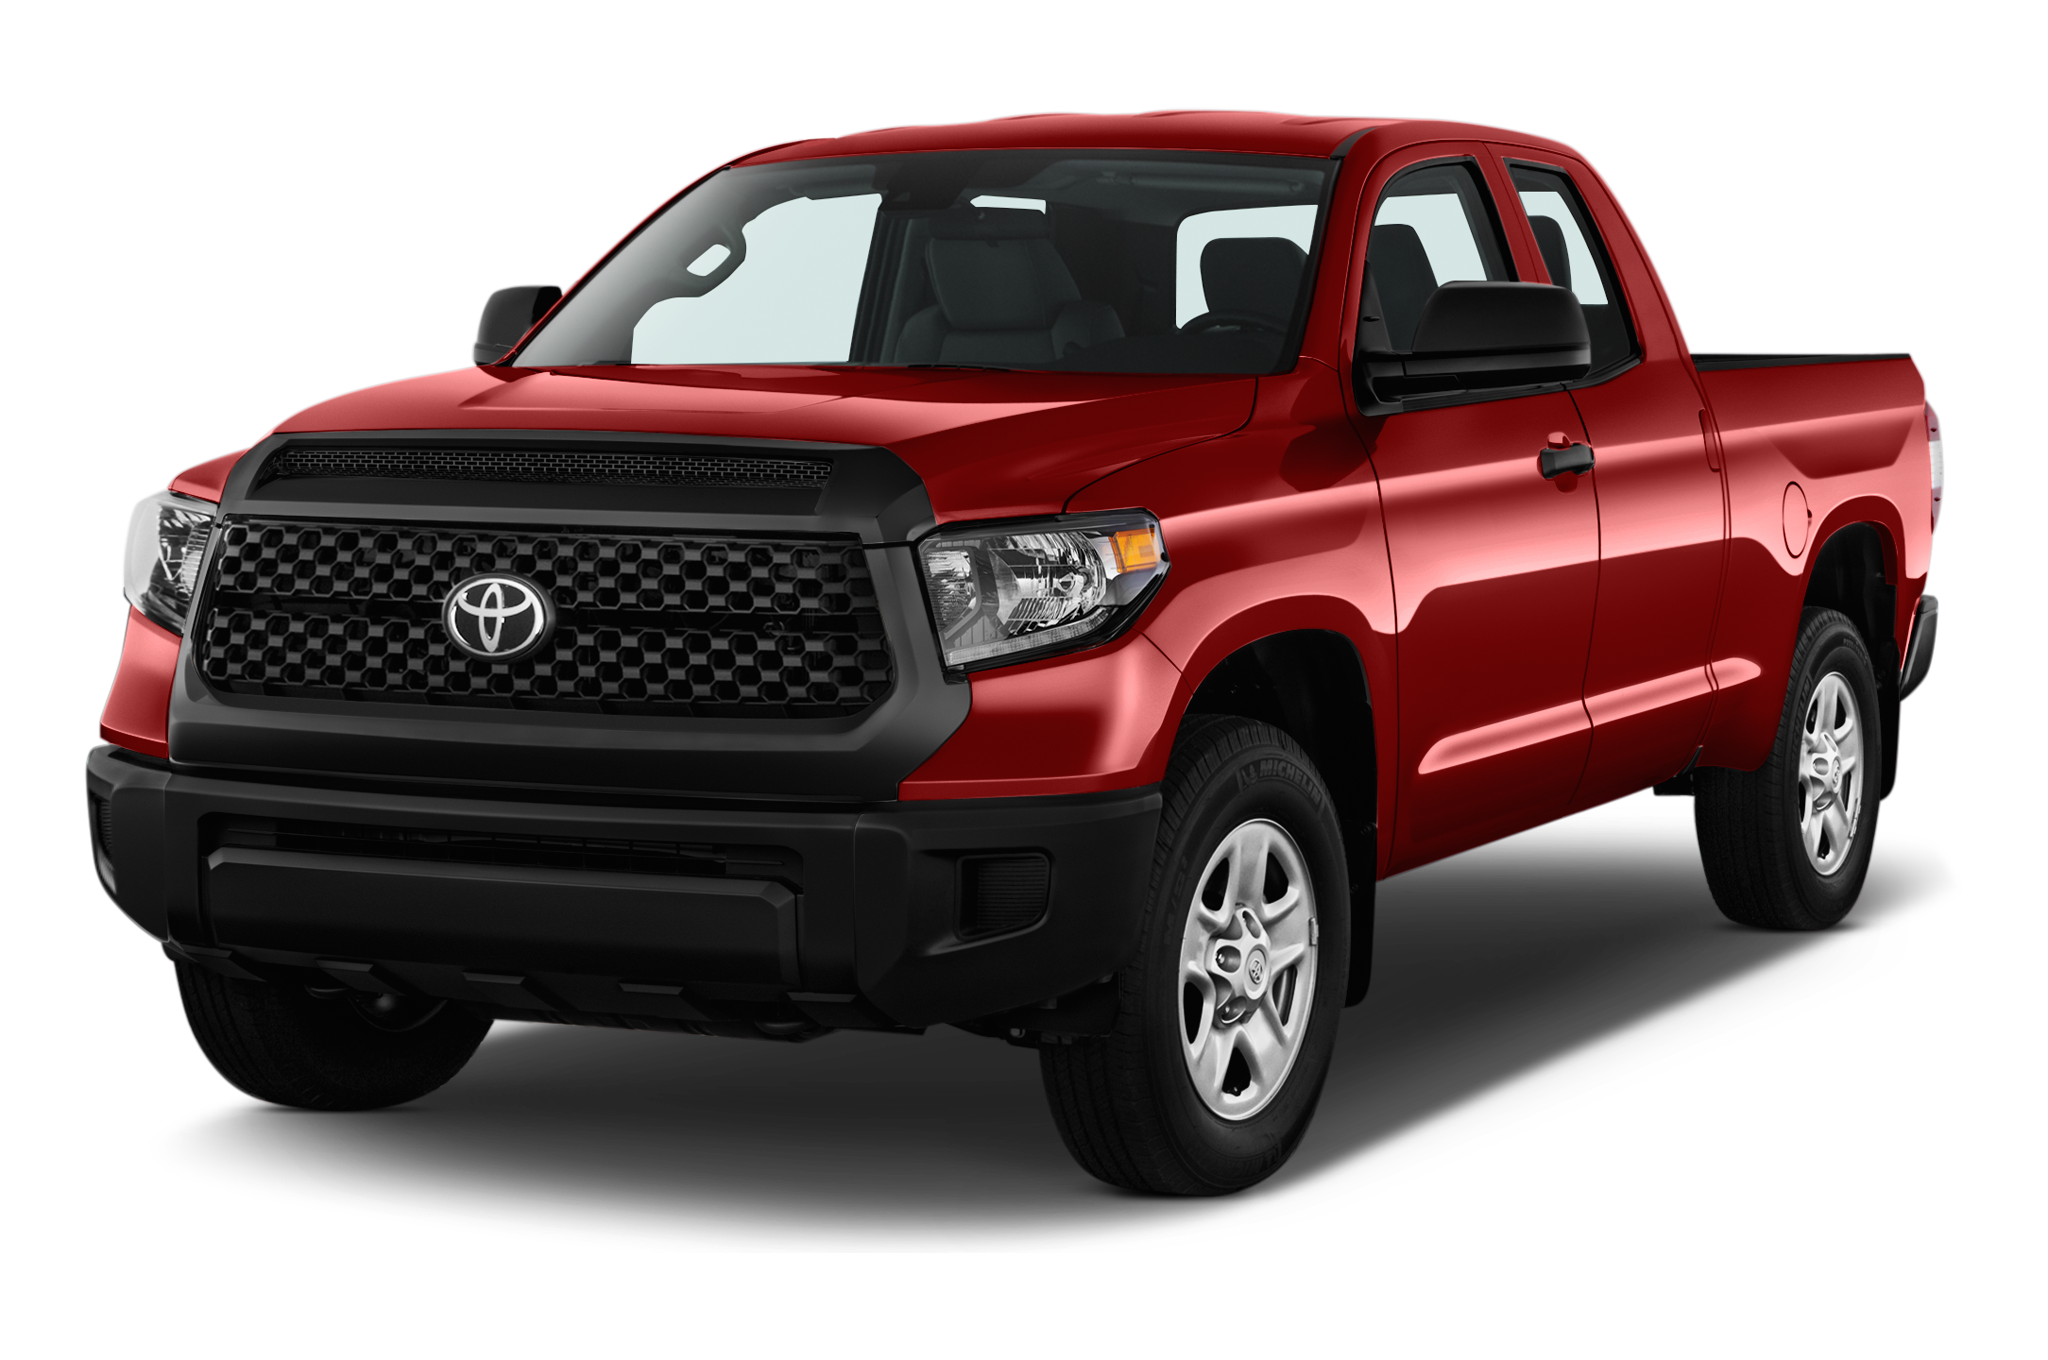 2018 Toyota Tundra SR 5.7L Double Cab Standard Bed Overview - MSN Autos